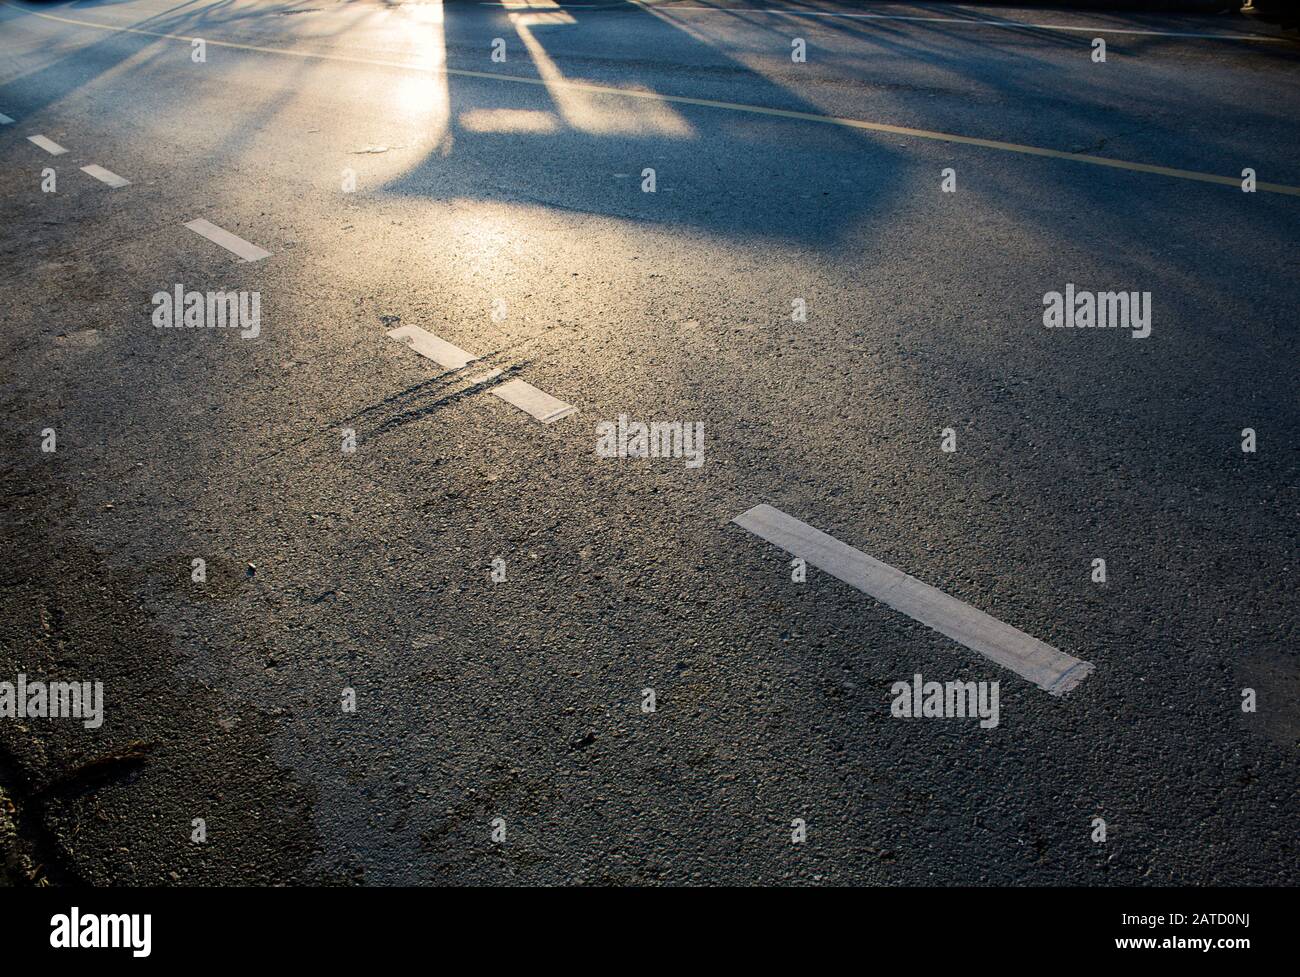 Morning light falls on an empty street's asphalt surface, with shadows, white and yellow road markings, and a surface irregularity of interest. Stock Photo